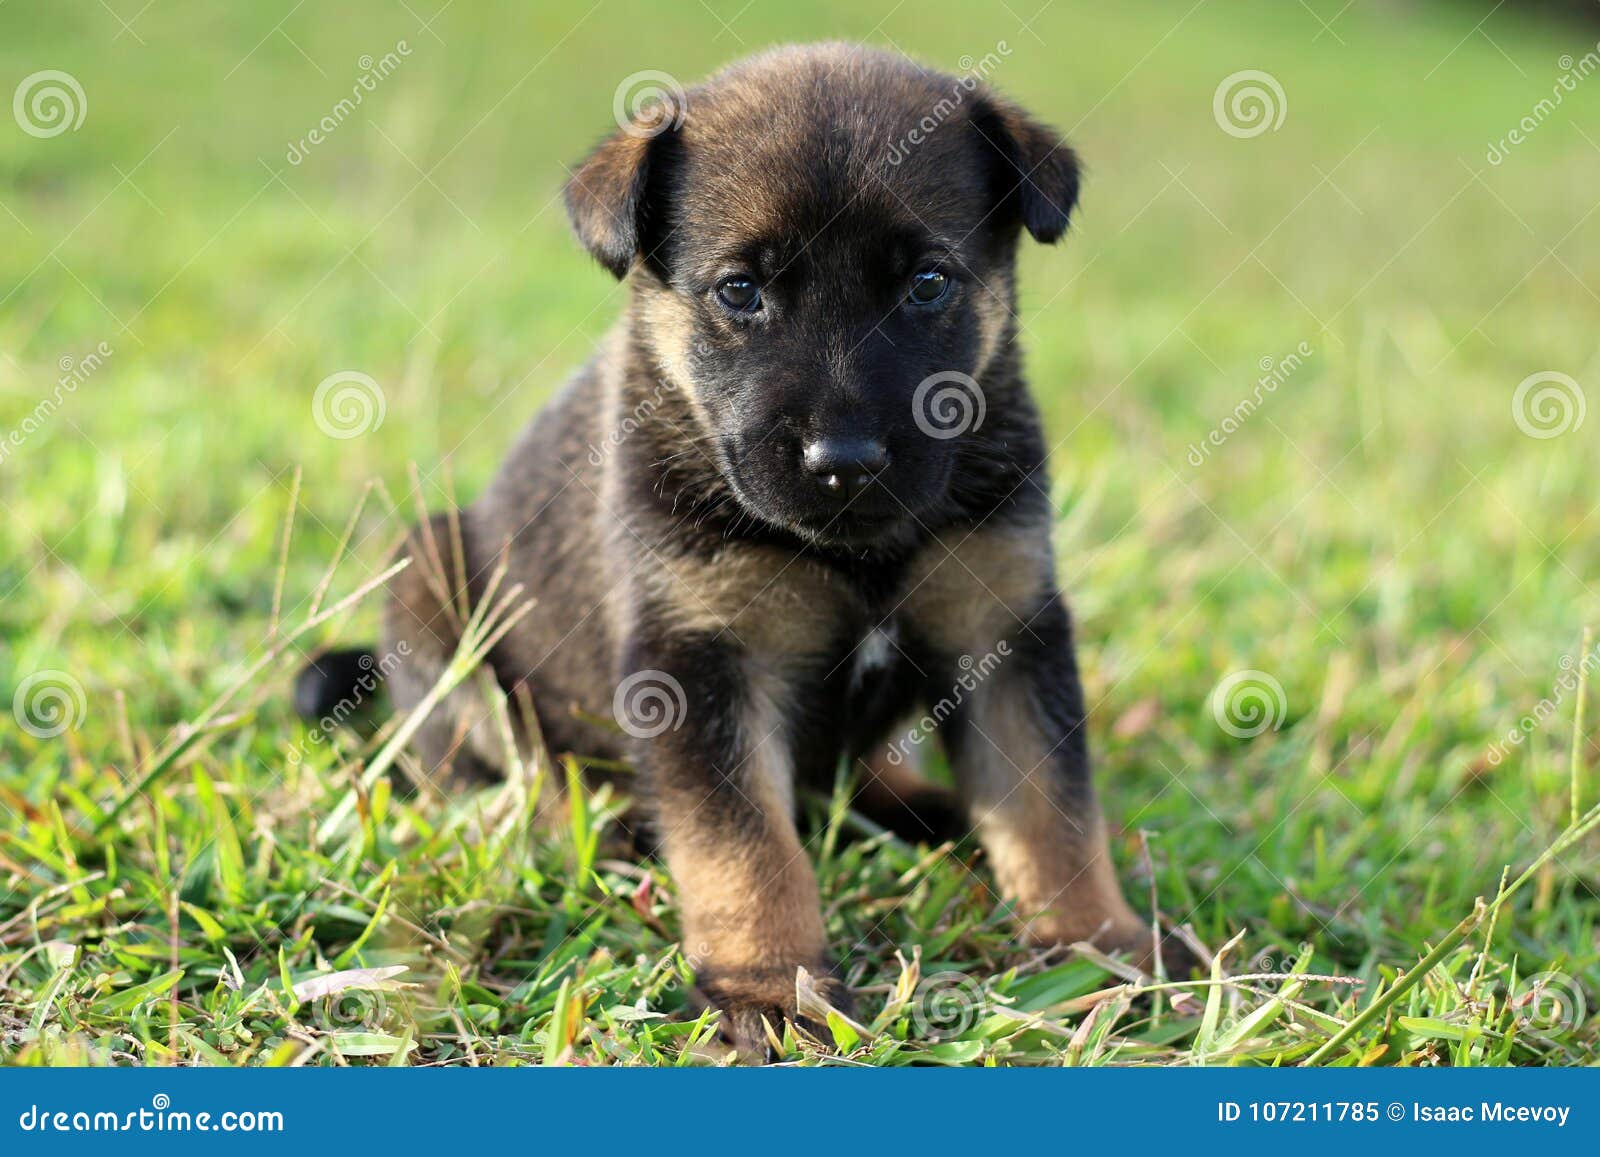 Cute Black Puppy With Brown Markings Stock Image Image Of Grass Poses 107211785